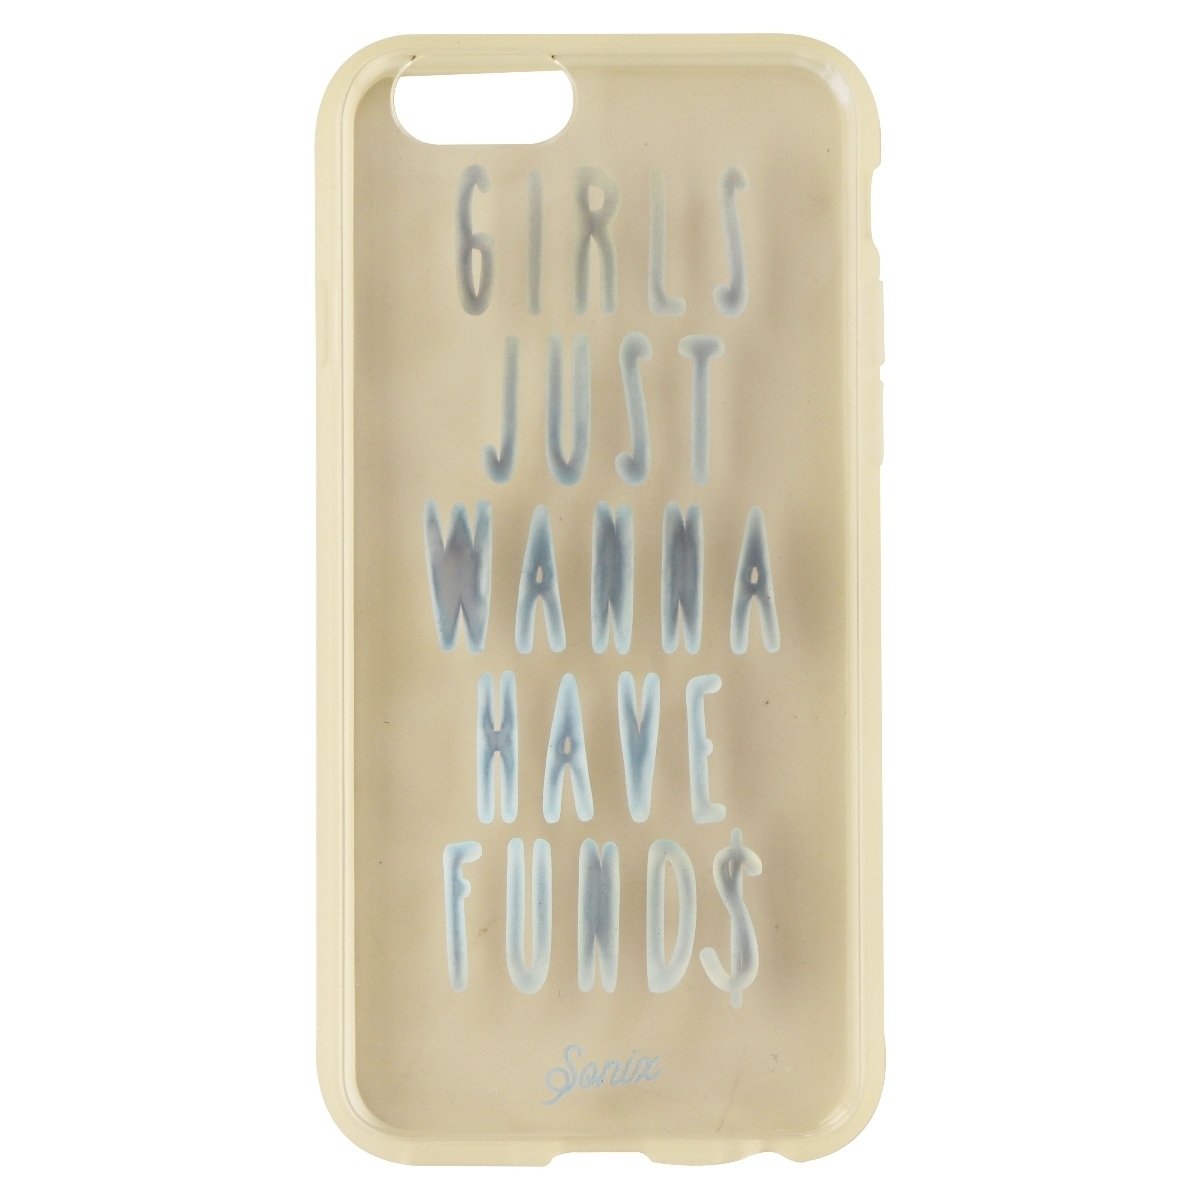 Sonix Clear Coat Series Case For IPhone 6s 6 - Clear/Girls Just Wanna Have Fund$